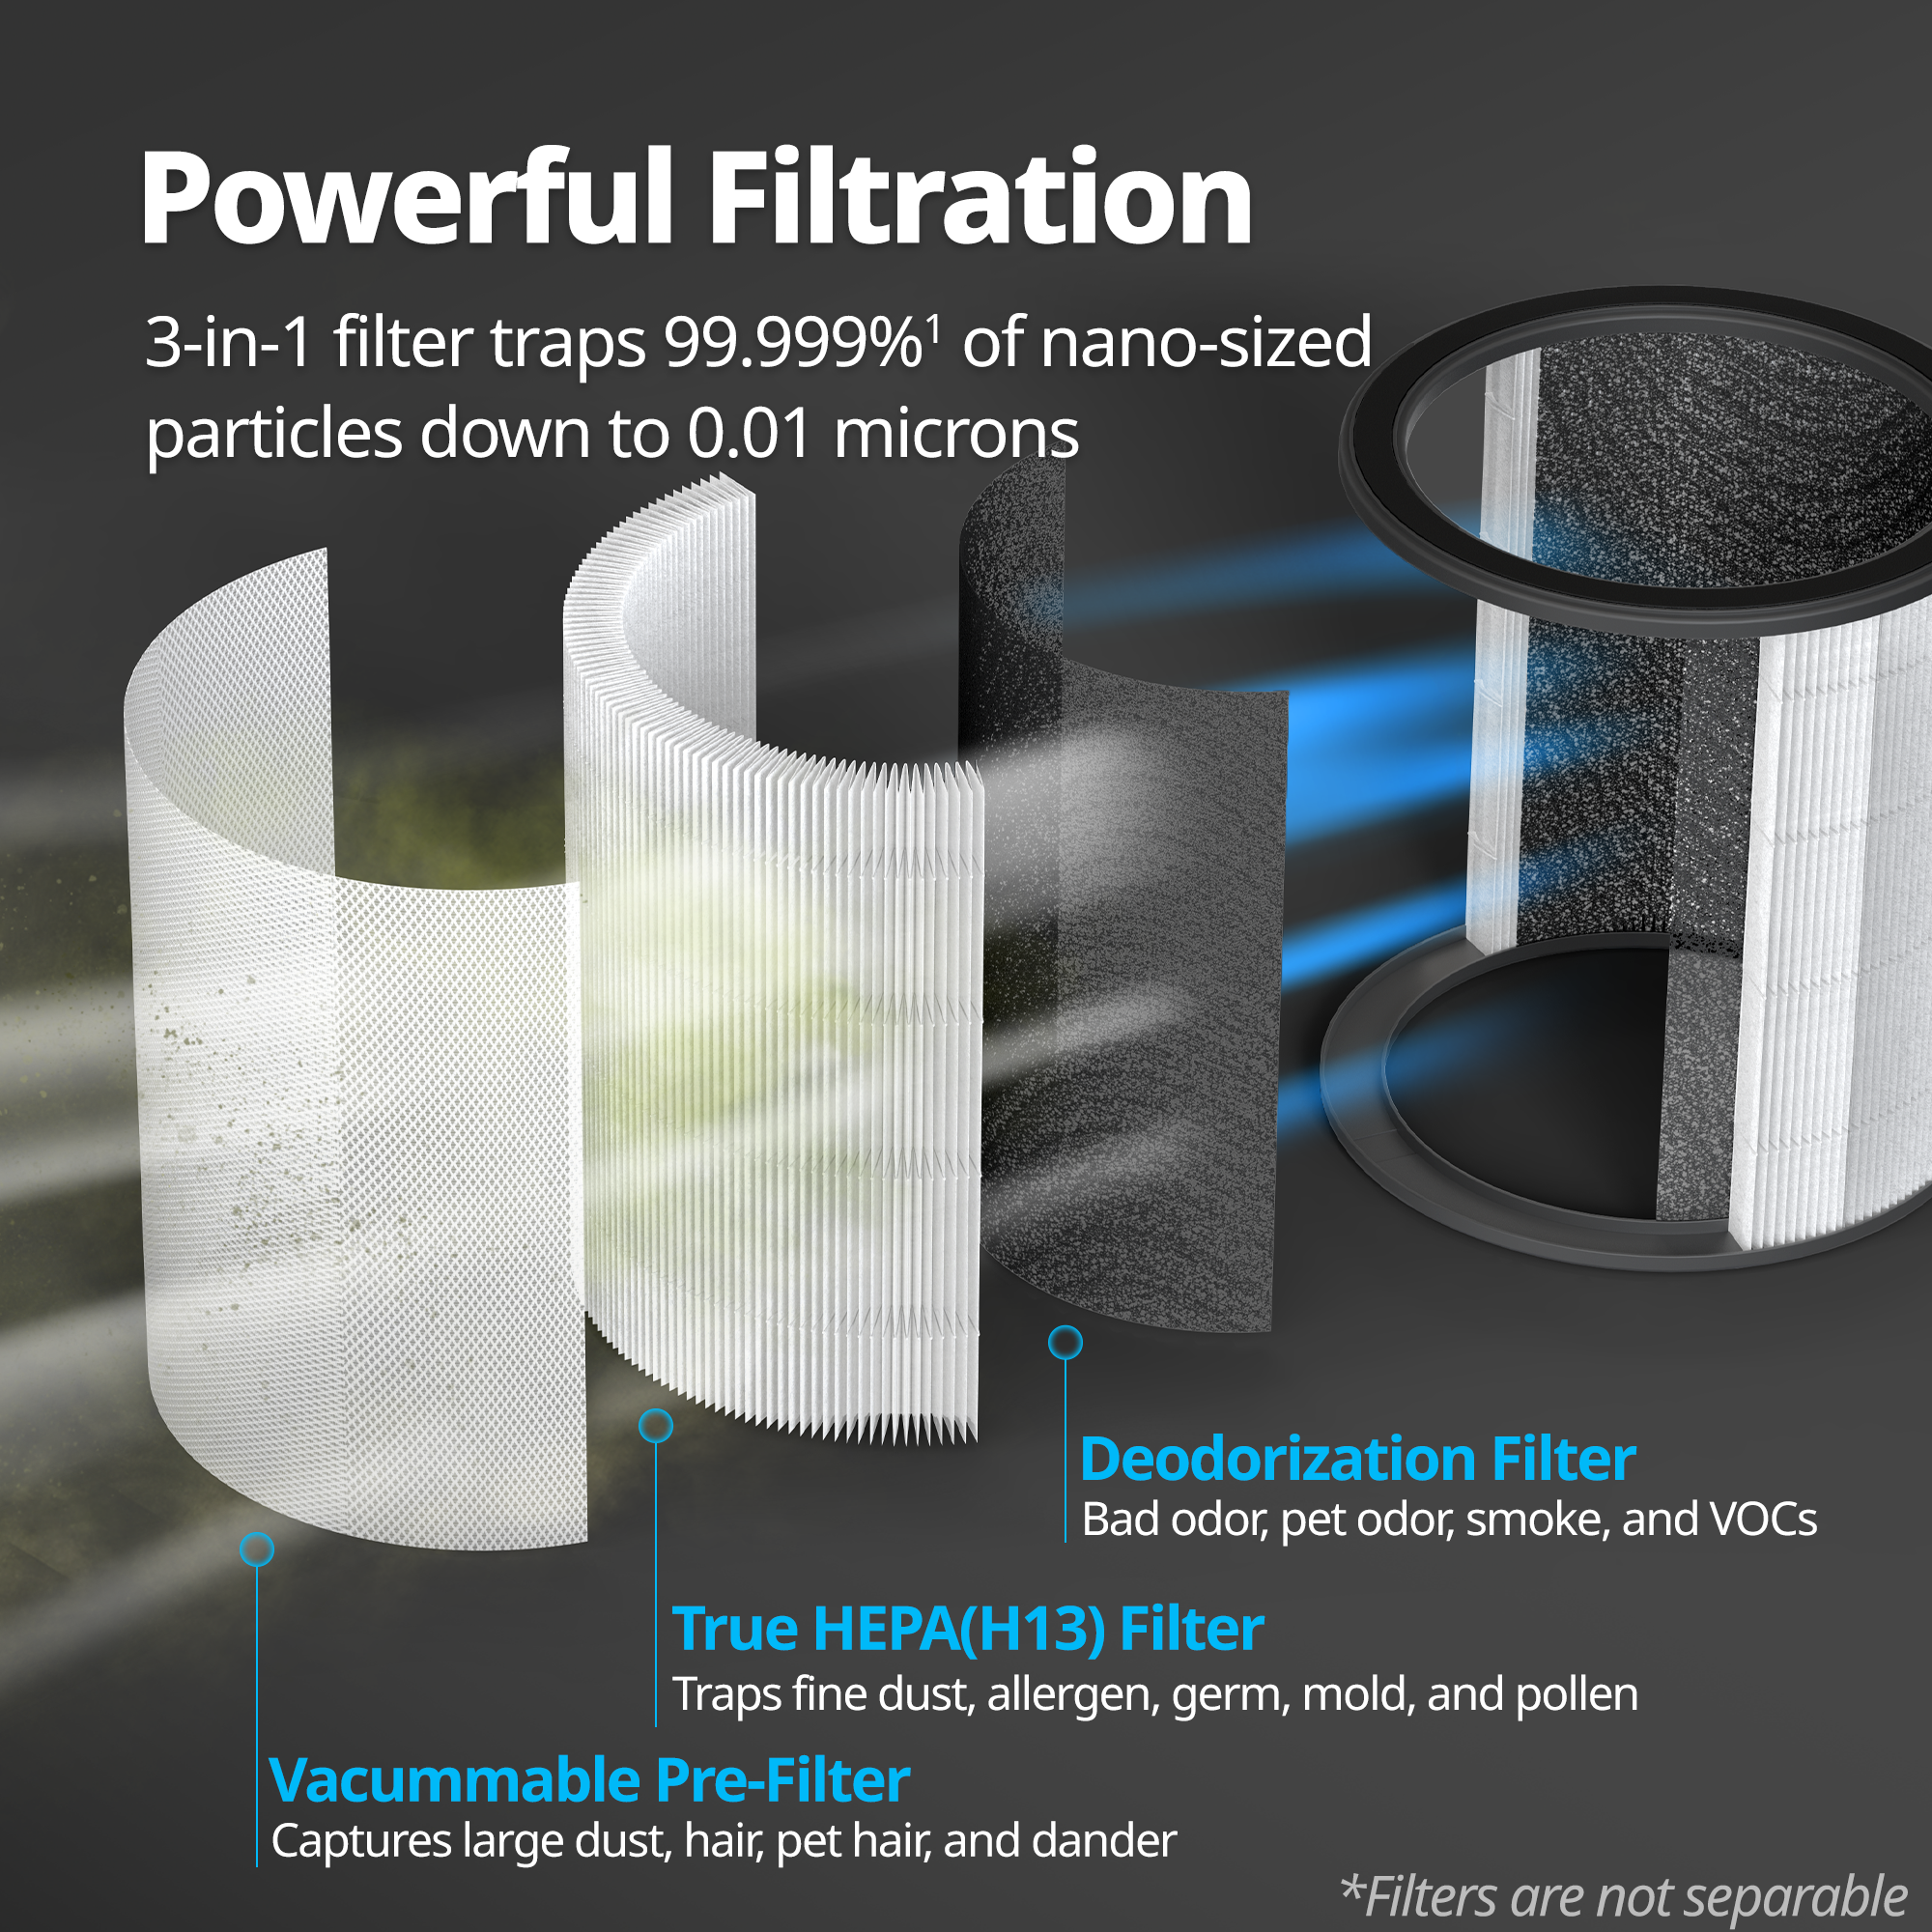 Powerful 3-Stage Filtration